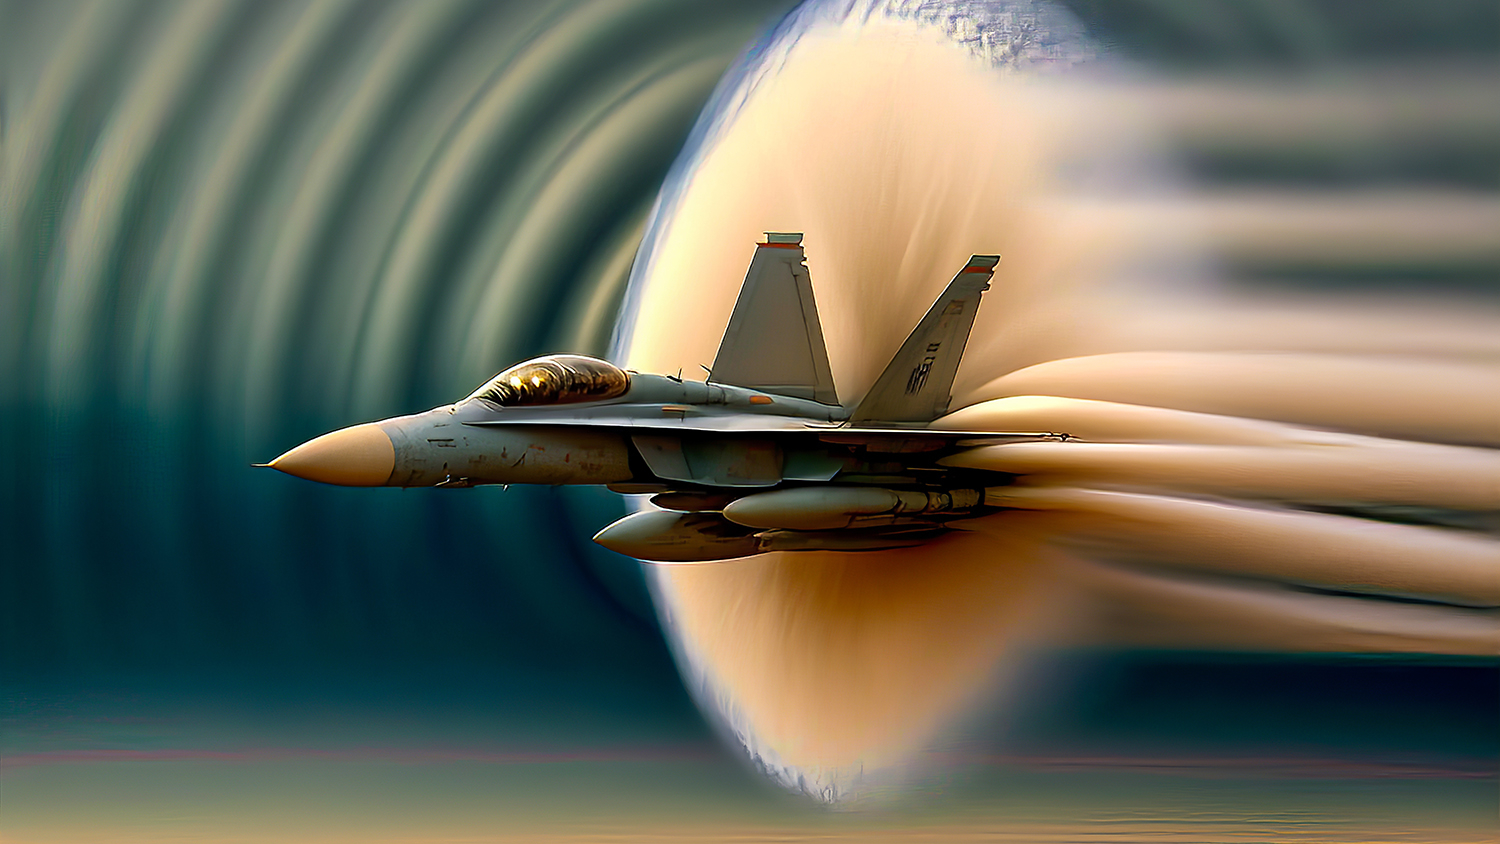 hypersonic jet flying though illustrated soundwaves